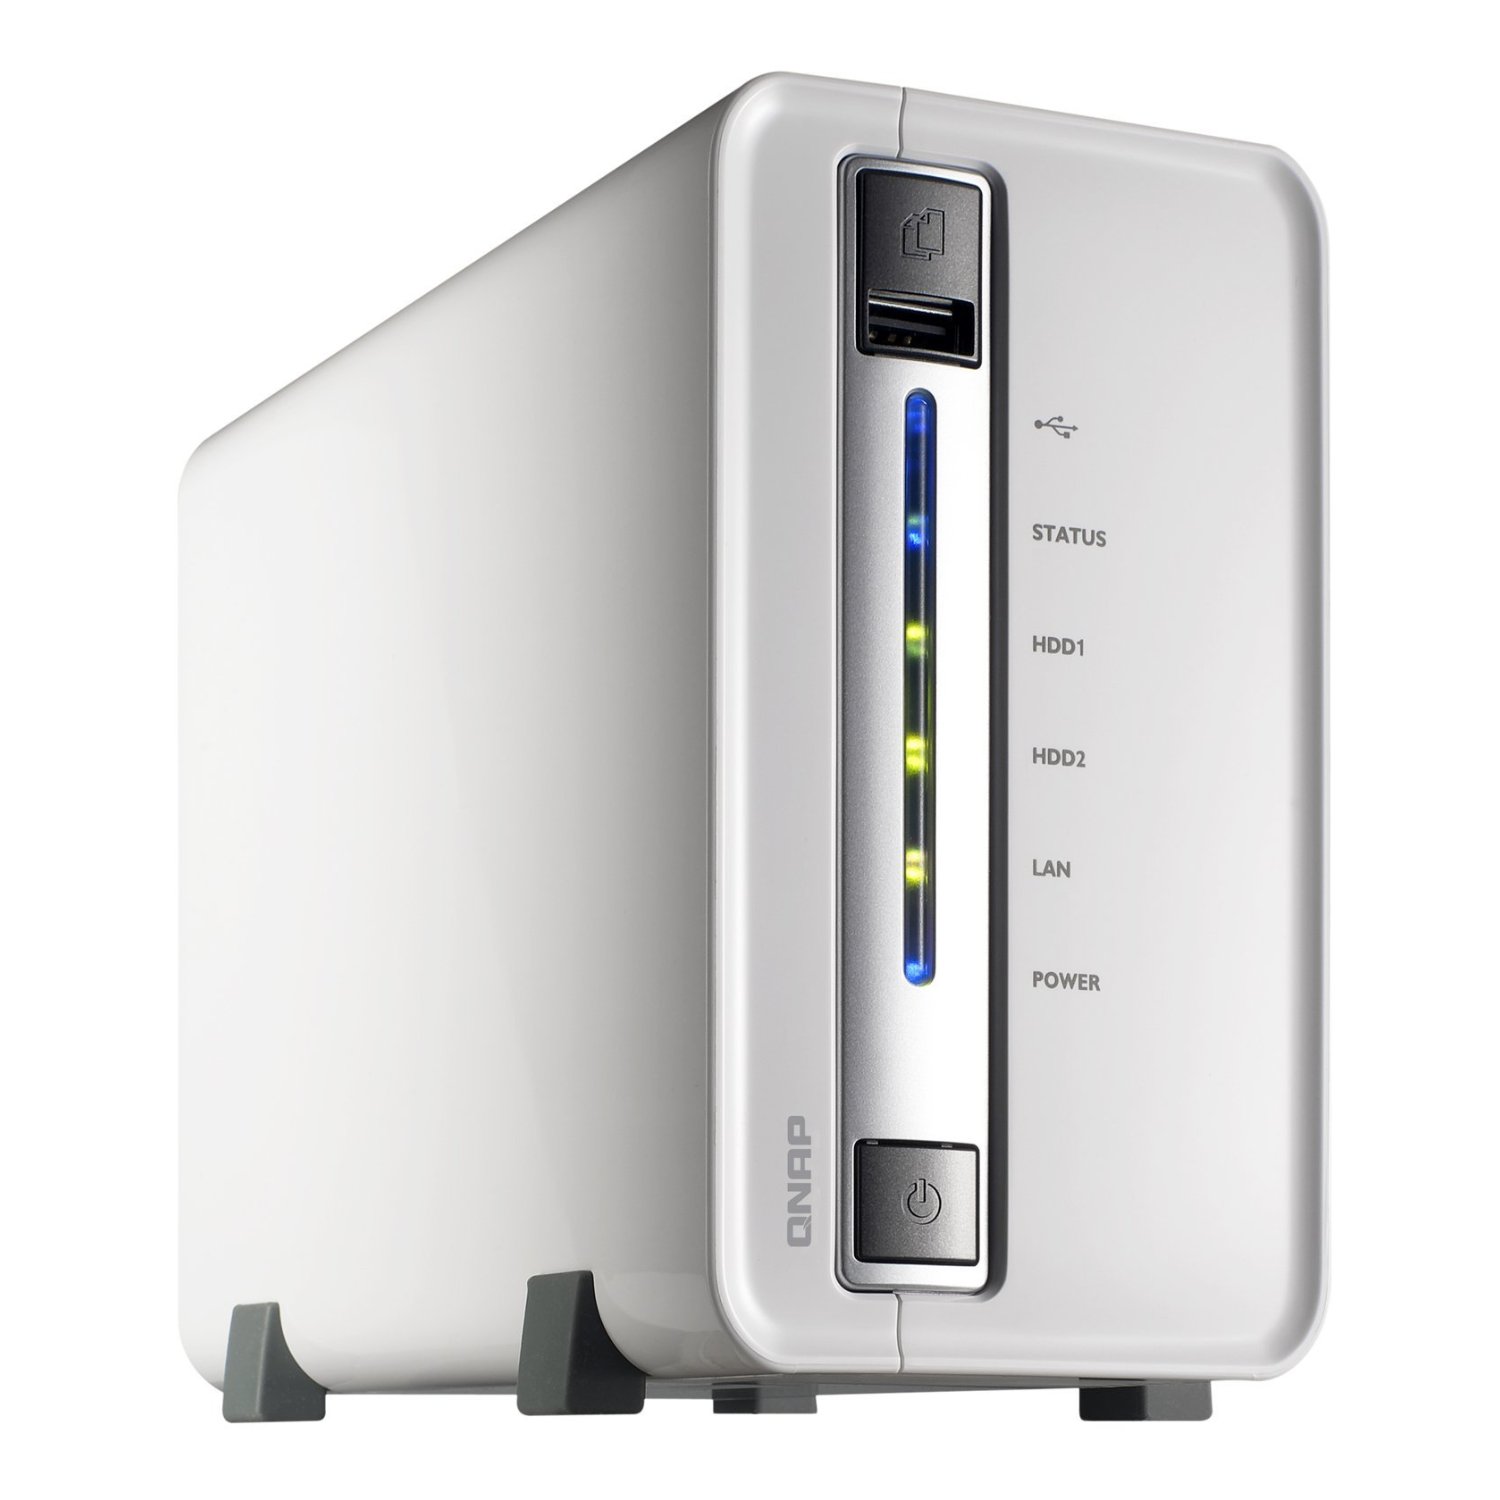 http://thetechjournal.com/wp-content/uploads/images/1110/1319020036-qnap-ts210-2bay-desktop-network-attached-storage-1.jpg